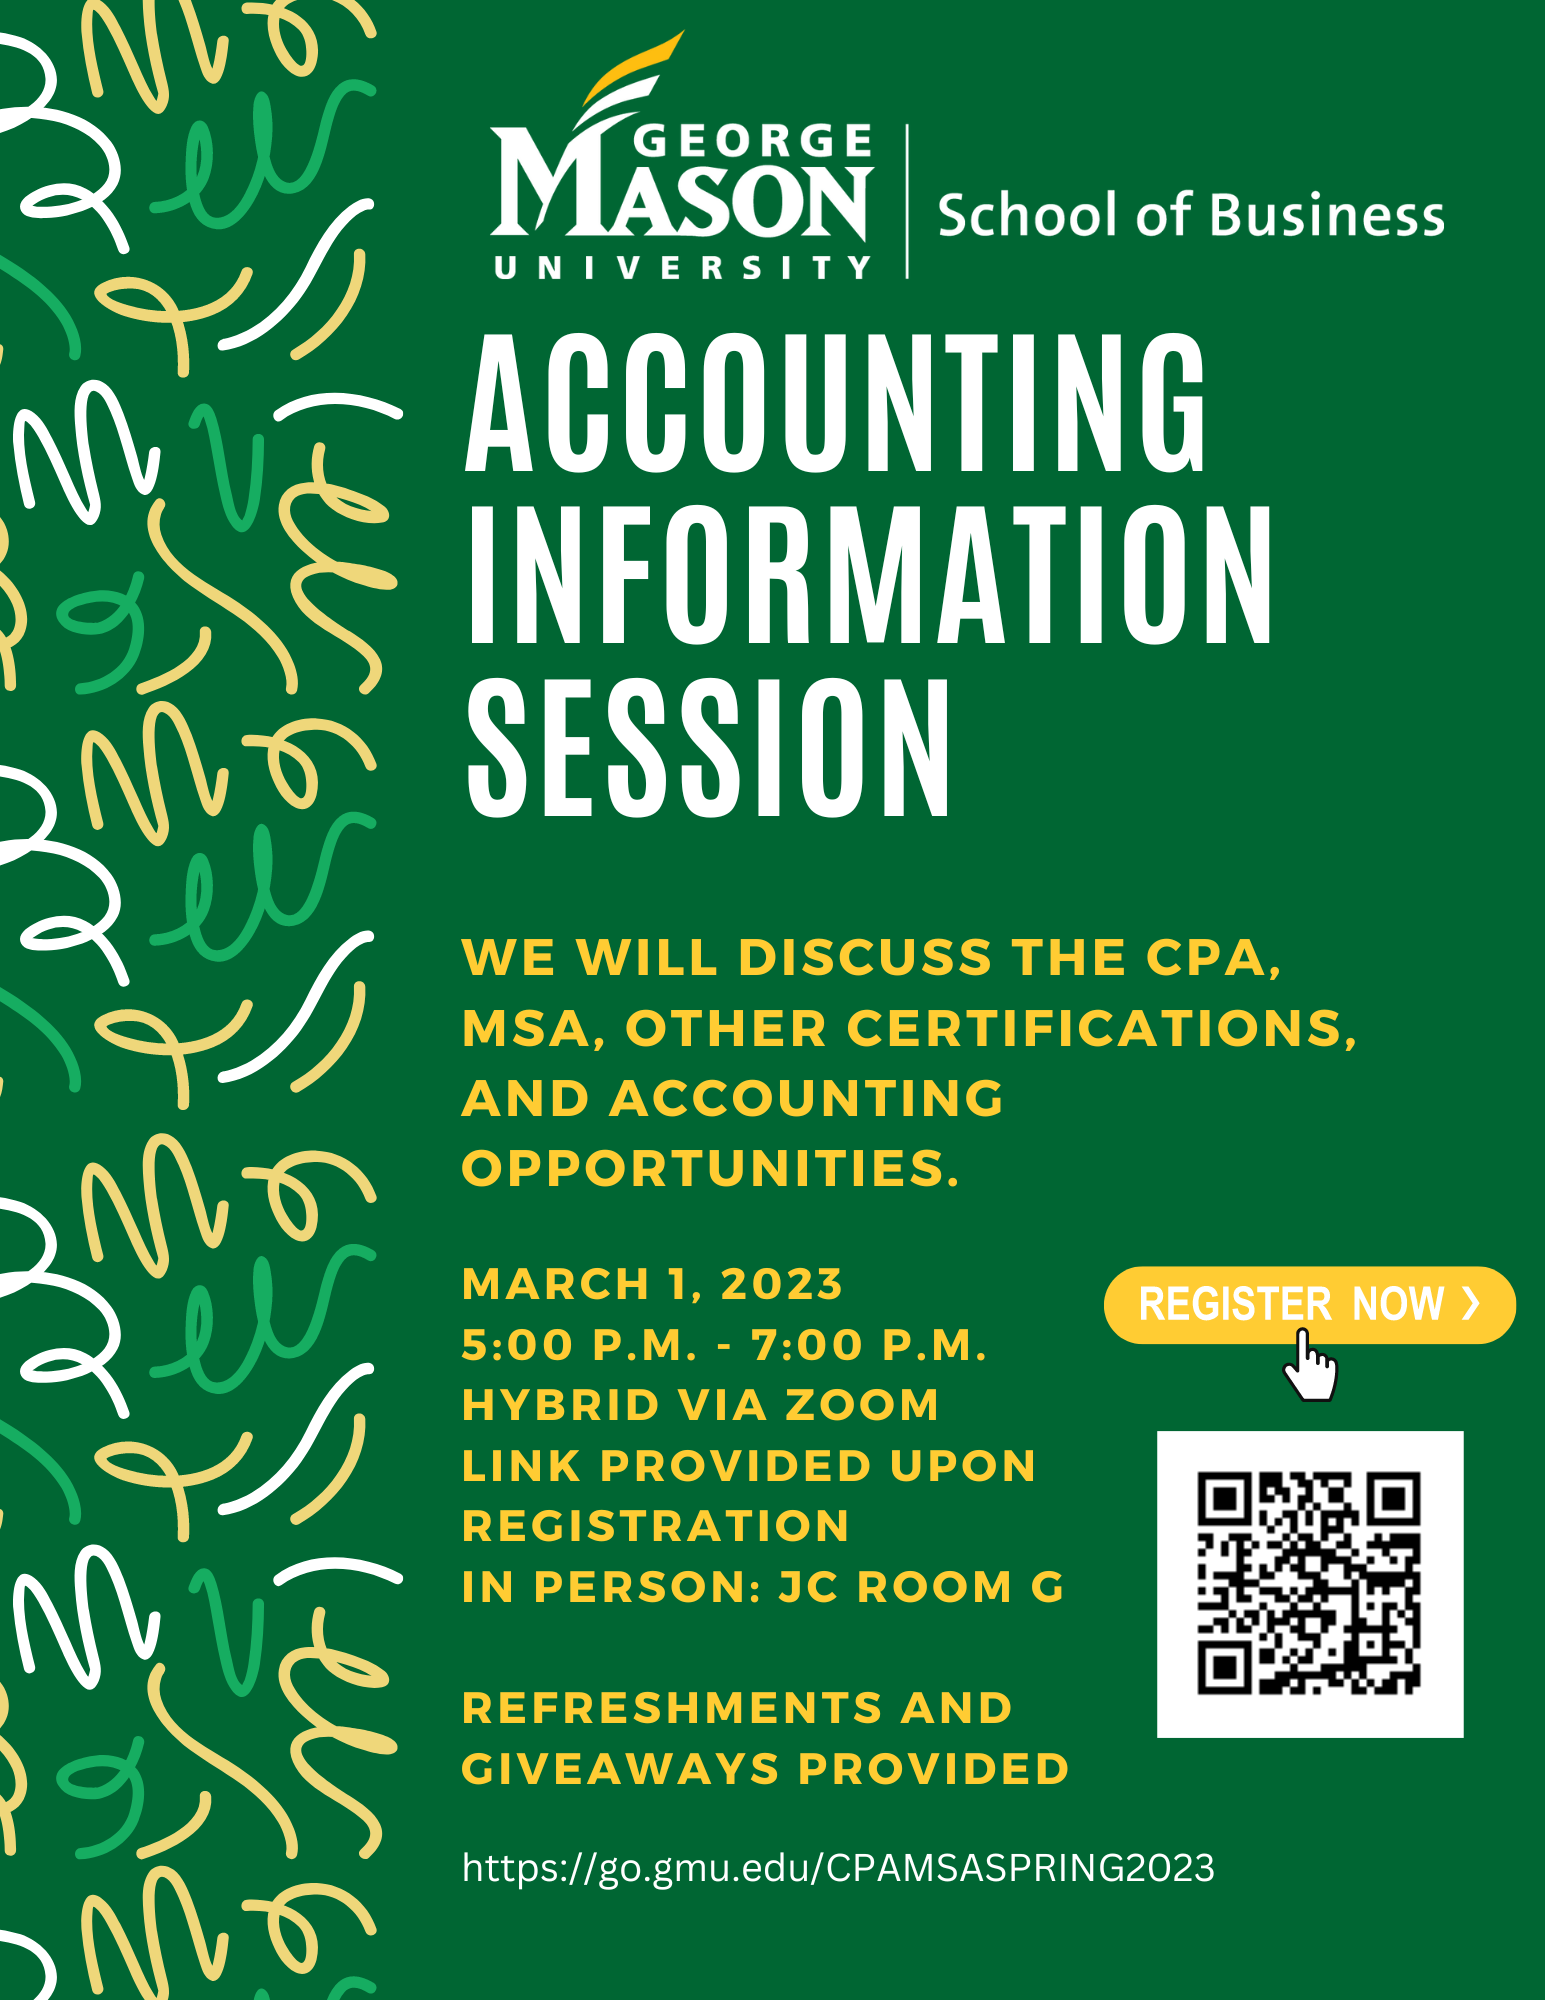 Flyer for the upcoming Accounting CPA/MSA information session on March 1st through Zoom or in person in the Johnson Center Room G. Visit https://go.gmu.edu/CPAMSASPRING2023 to RSVP now.